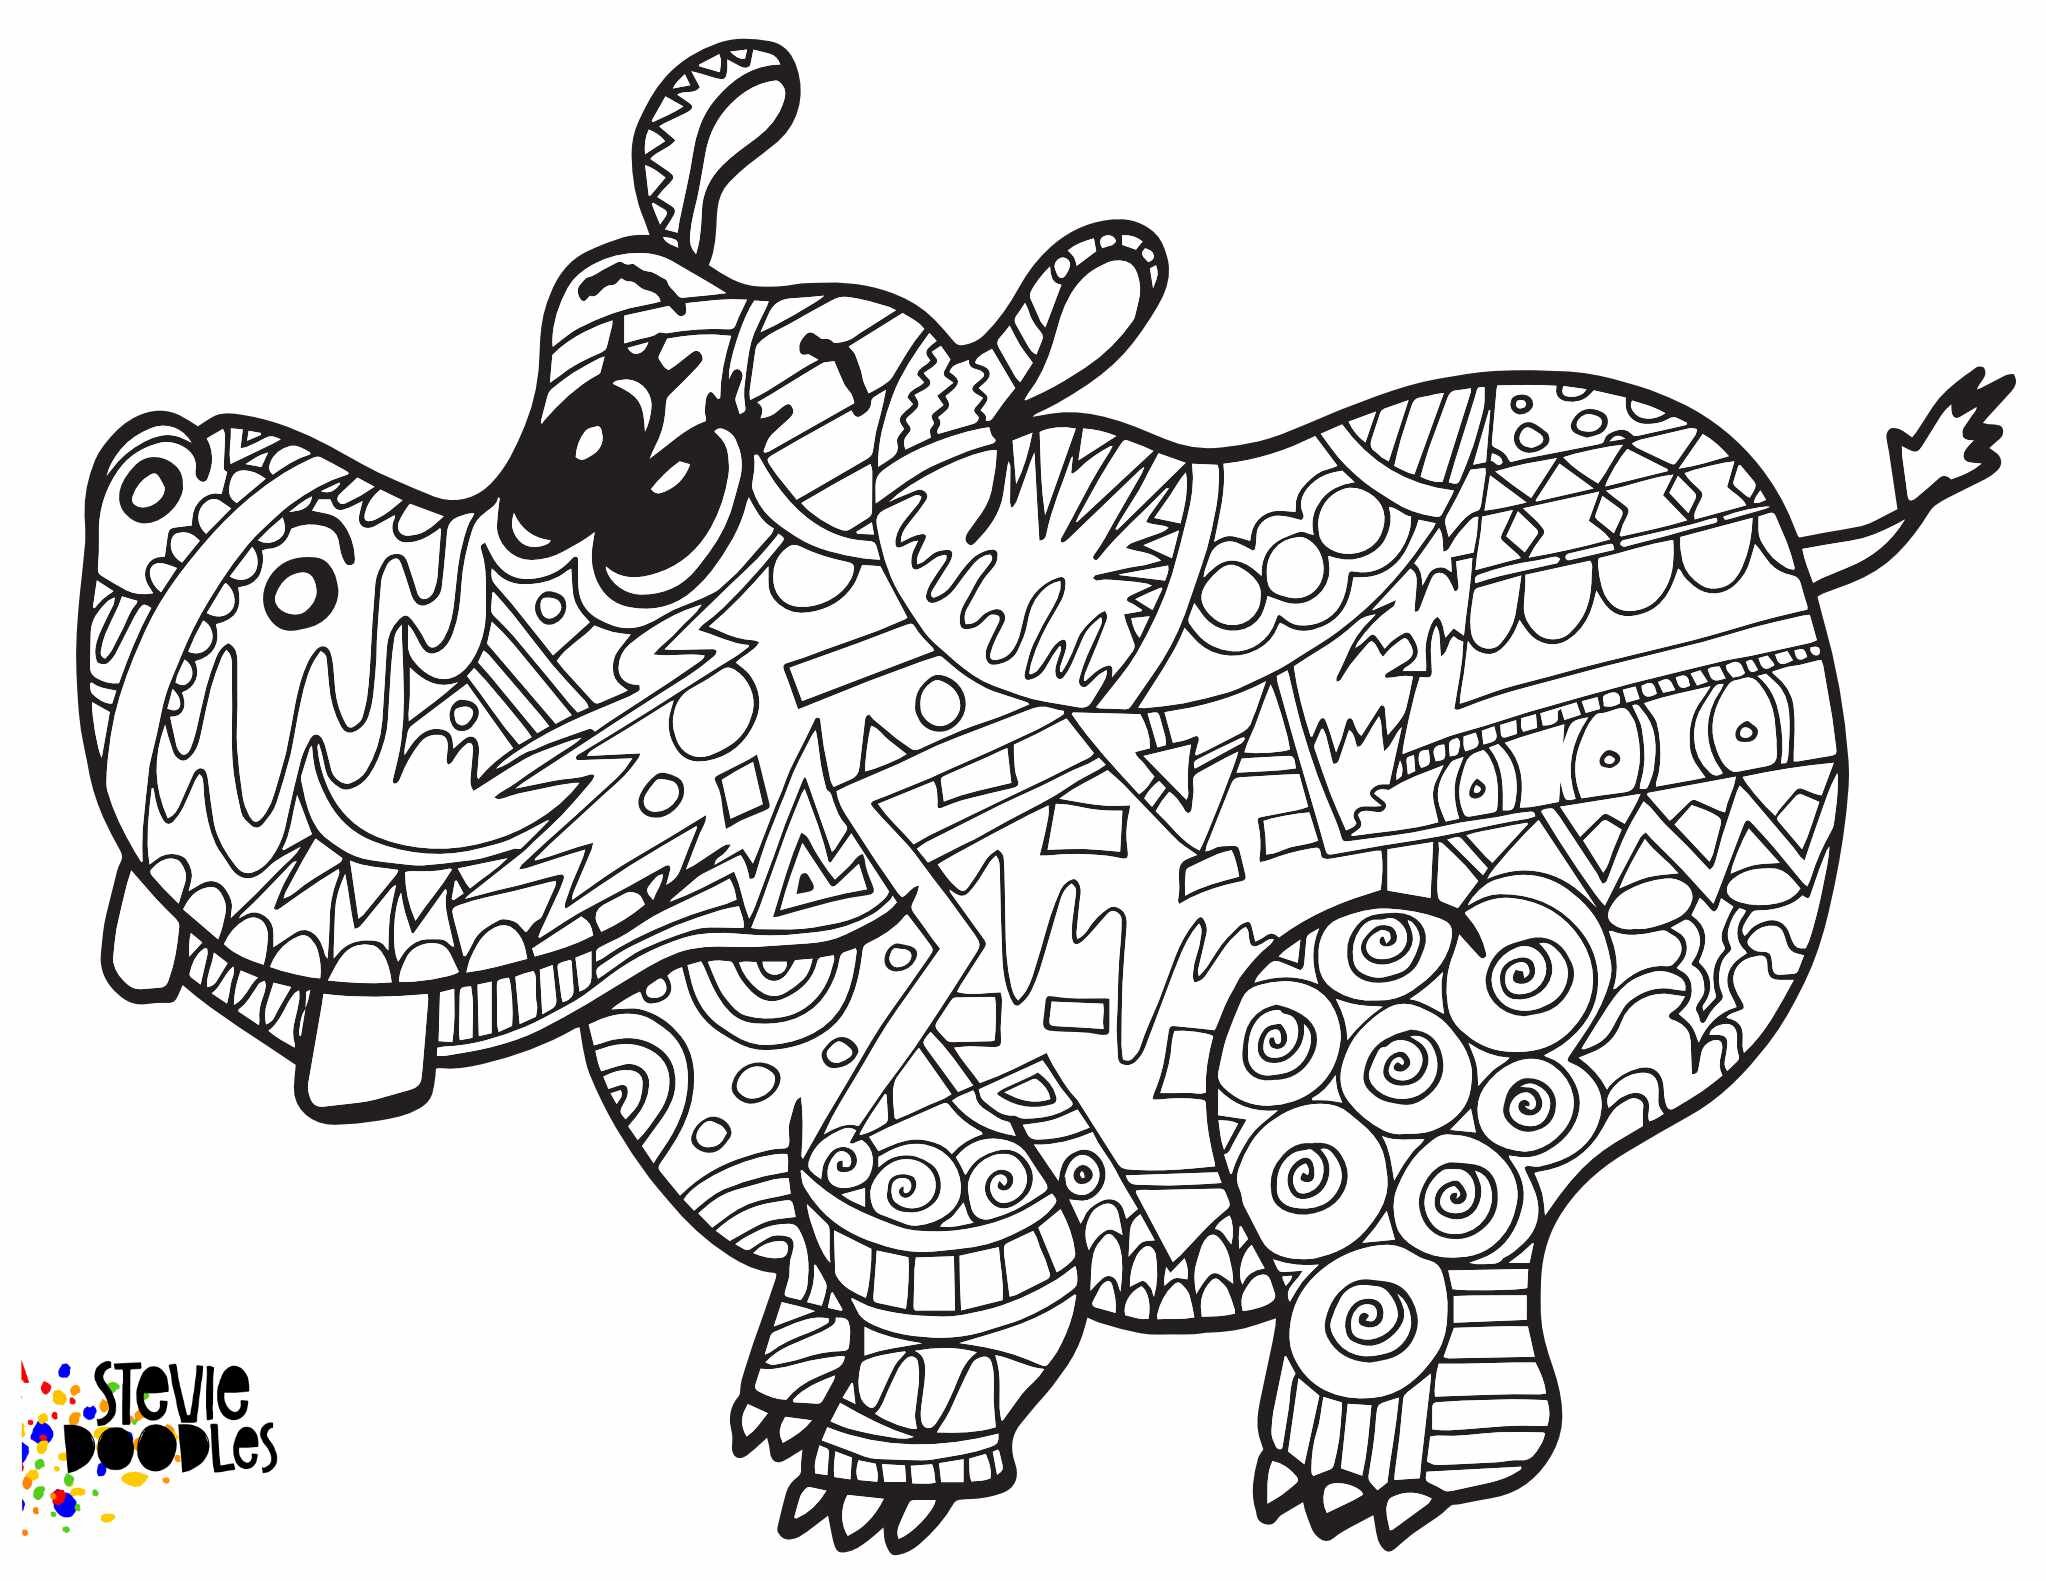 Free HIPPO Coloring Page CLICK HERE TO DOWNLOAD THE PAGE ABOVE!